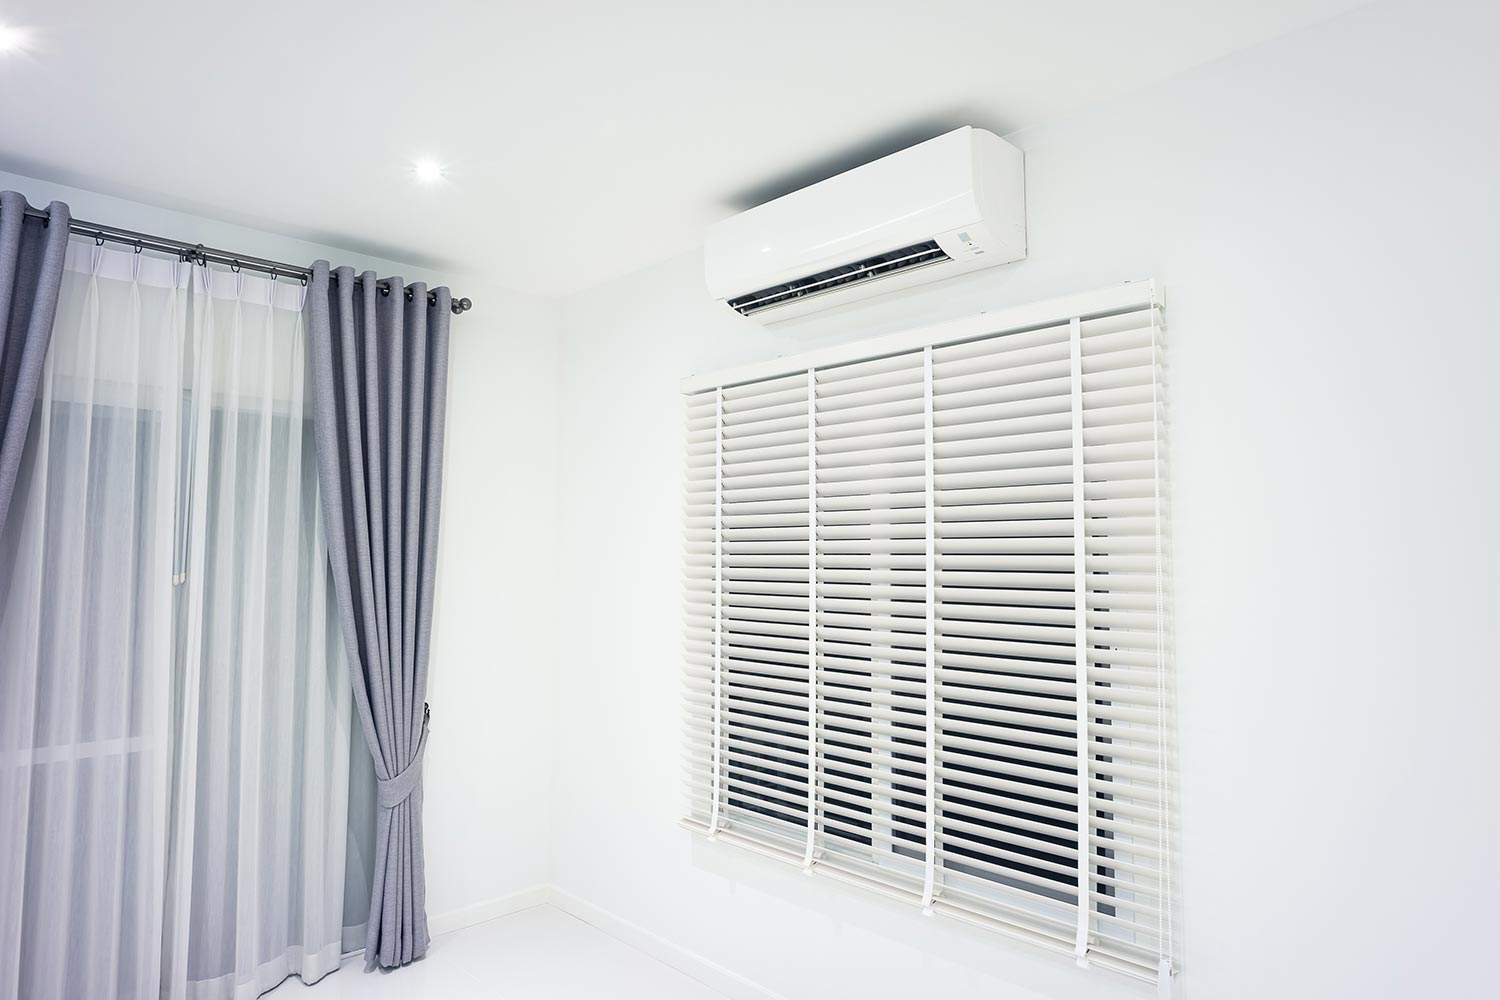 Blinds and air conditioner in room of home or house building